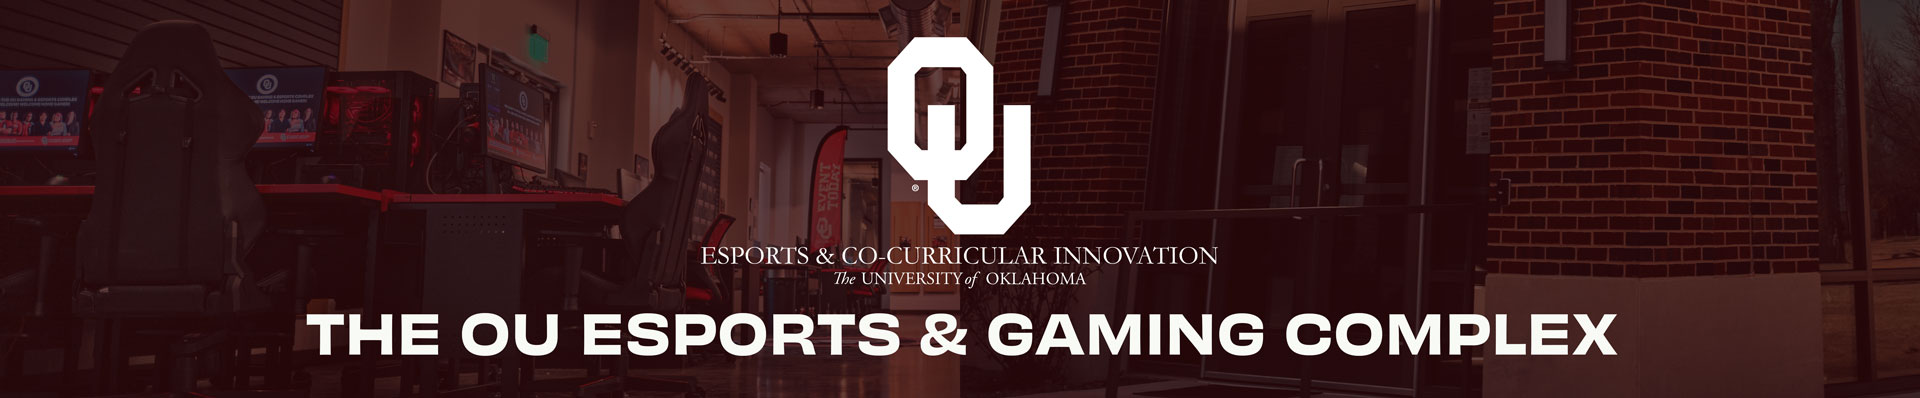 The Esports & Gaming Complex Banner